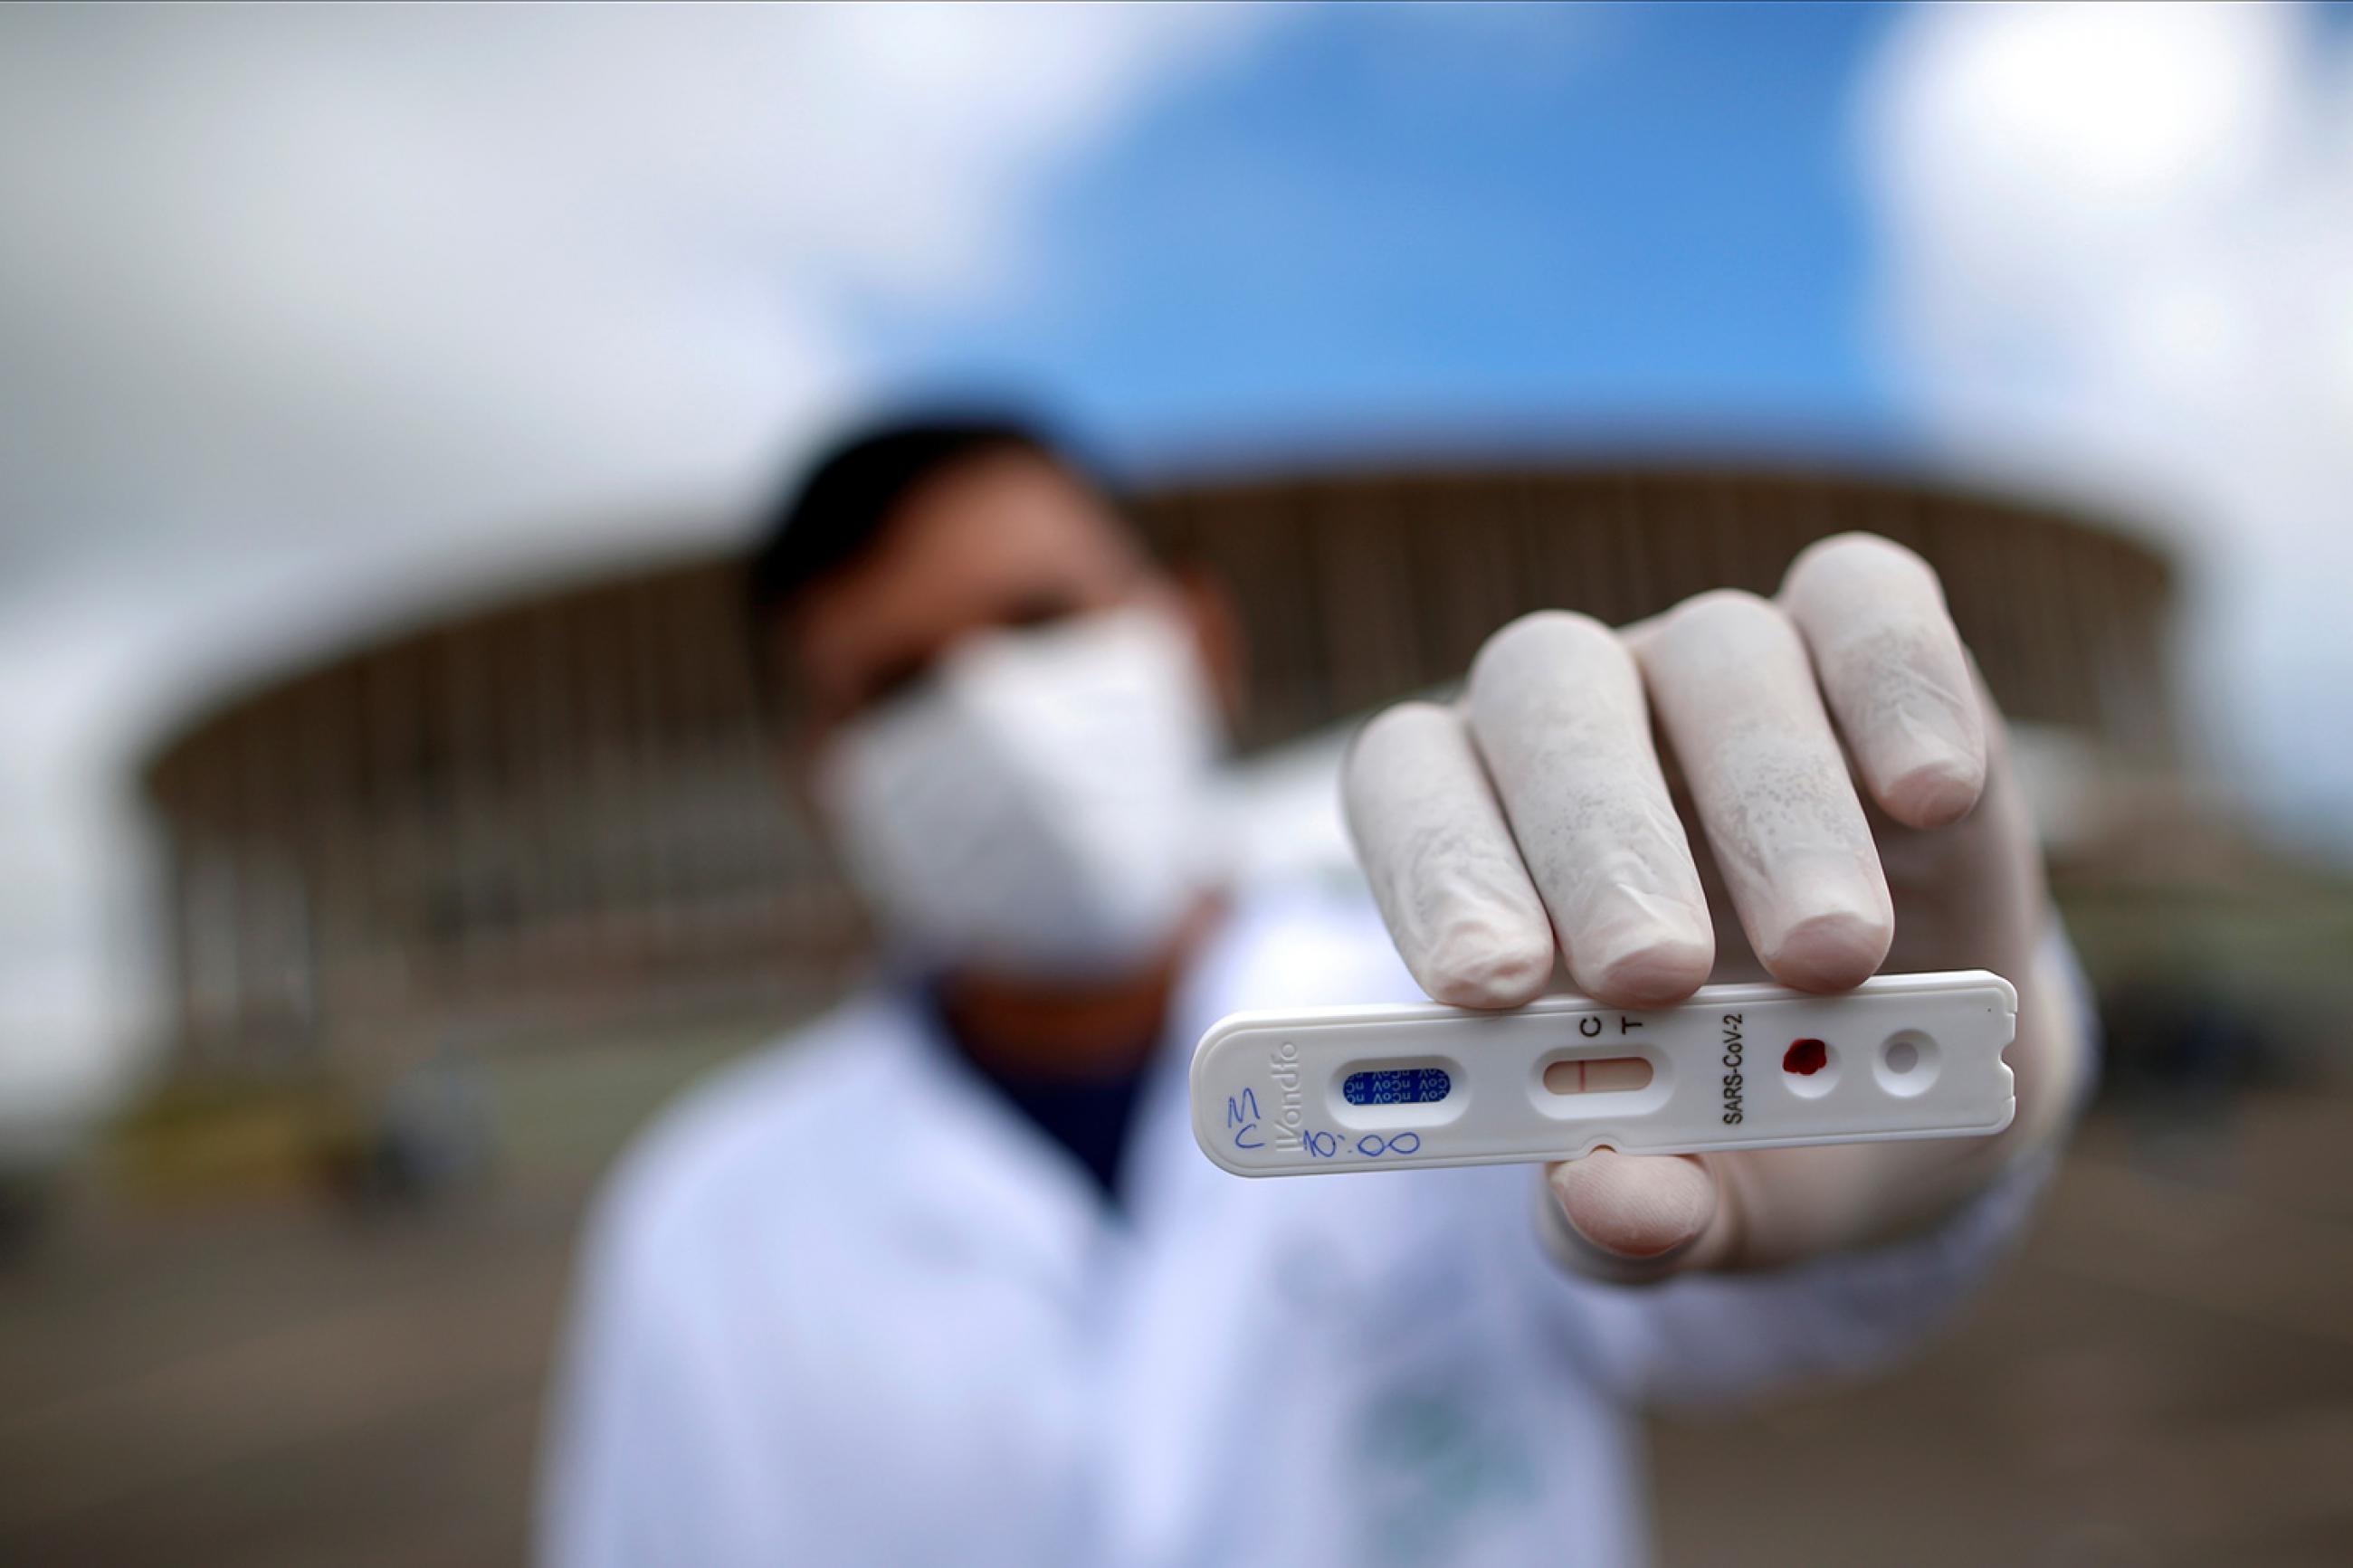 A medical professional shows a negative test for novel coronavirus in front of Mane Garrincha Stadium, amid the coronavirus disease (COVID-19) outbreak, in Brasilia, Brazil, on April 21, 2020. The photo shows a health worker holding a test at the camera with a stadium in the background. the photographer is using a telephoto/macro lens so that everything is blurred out in the shot, including the man, with the exception of the small plastic cassette-like test.  REUTERS/Ueslei Marcelino